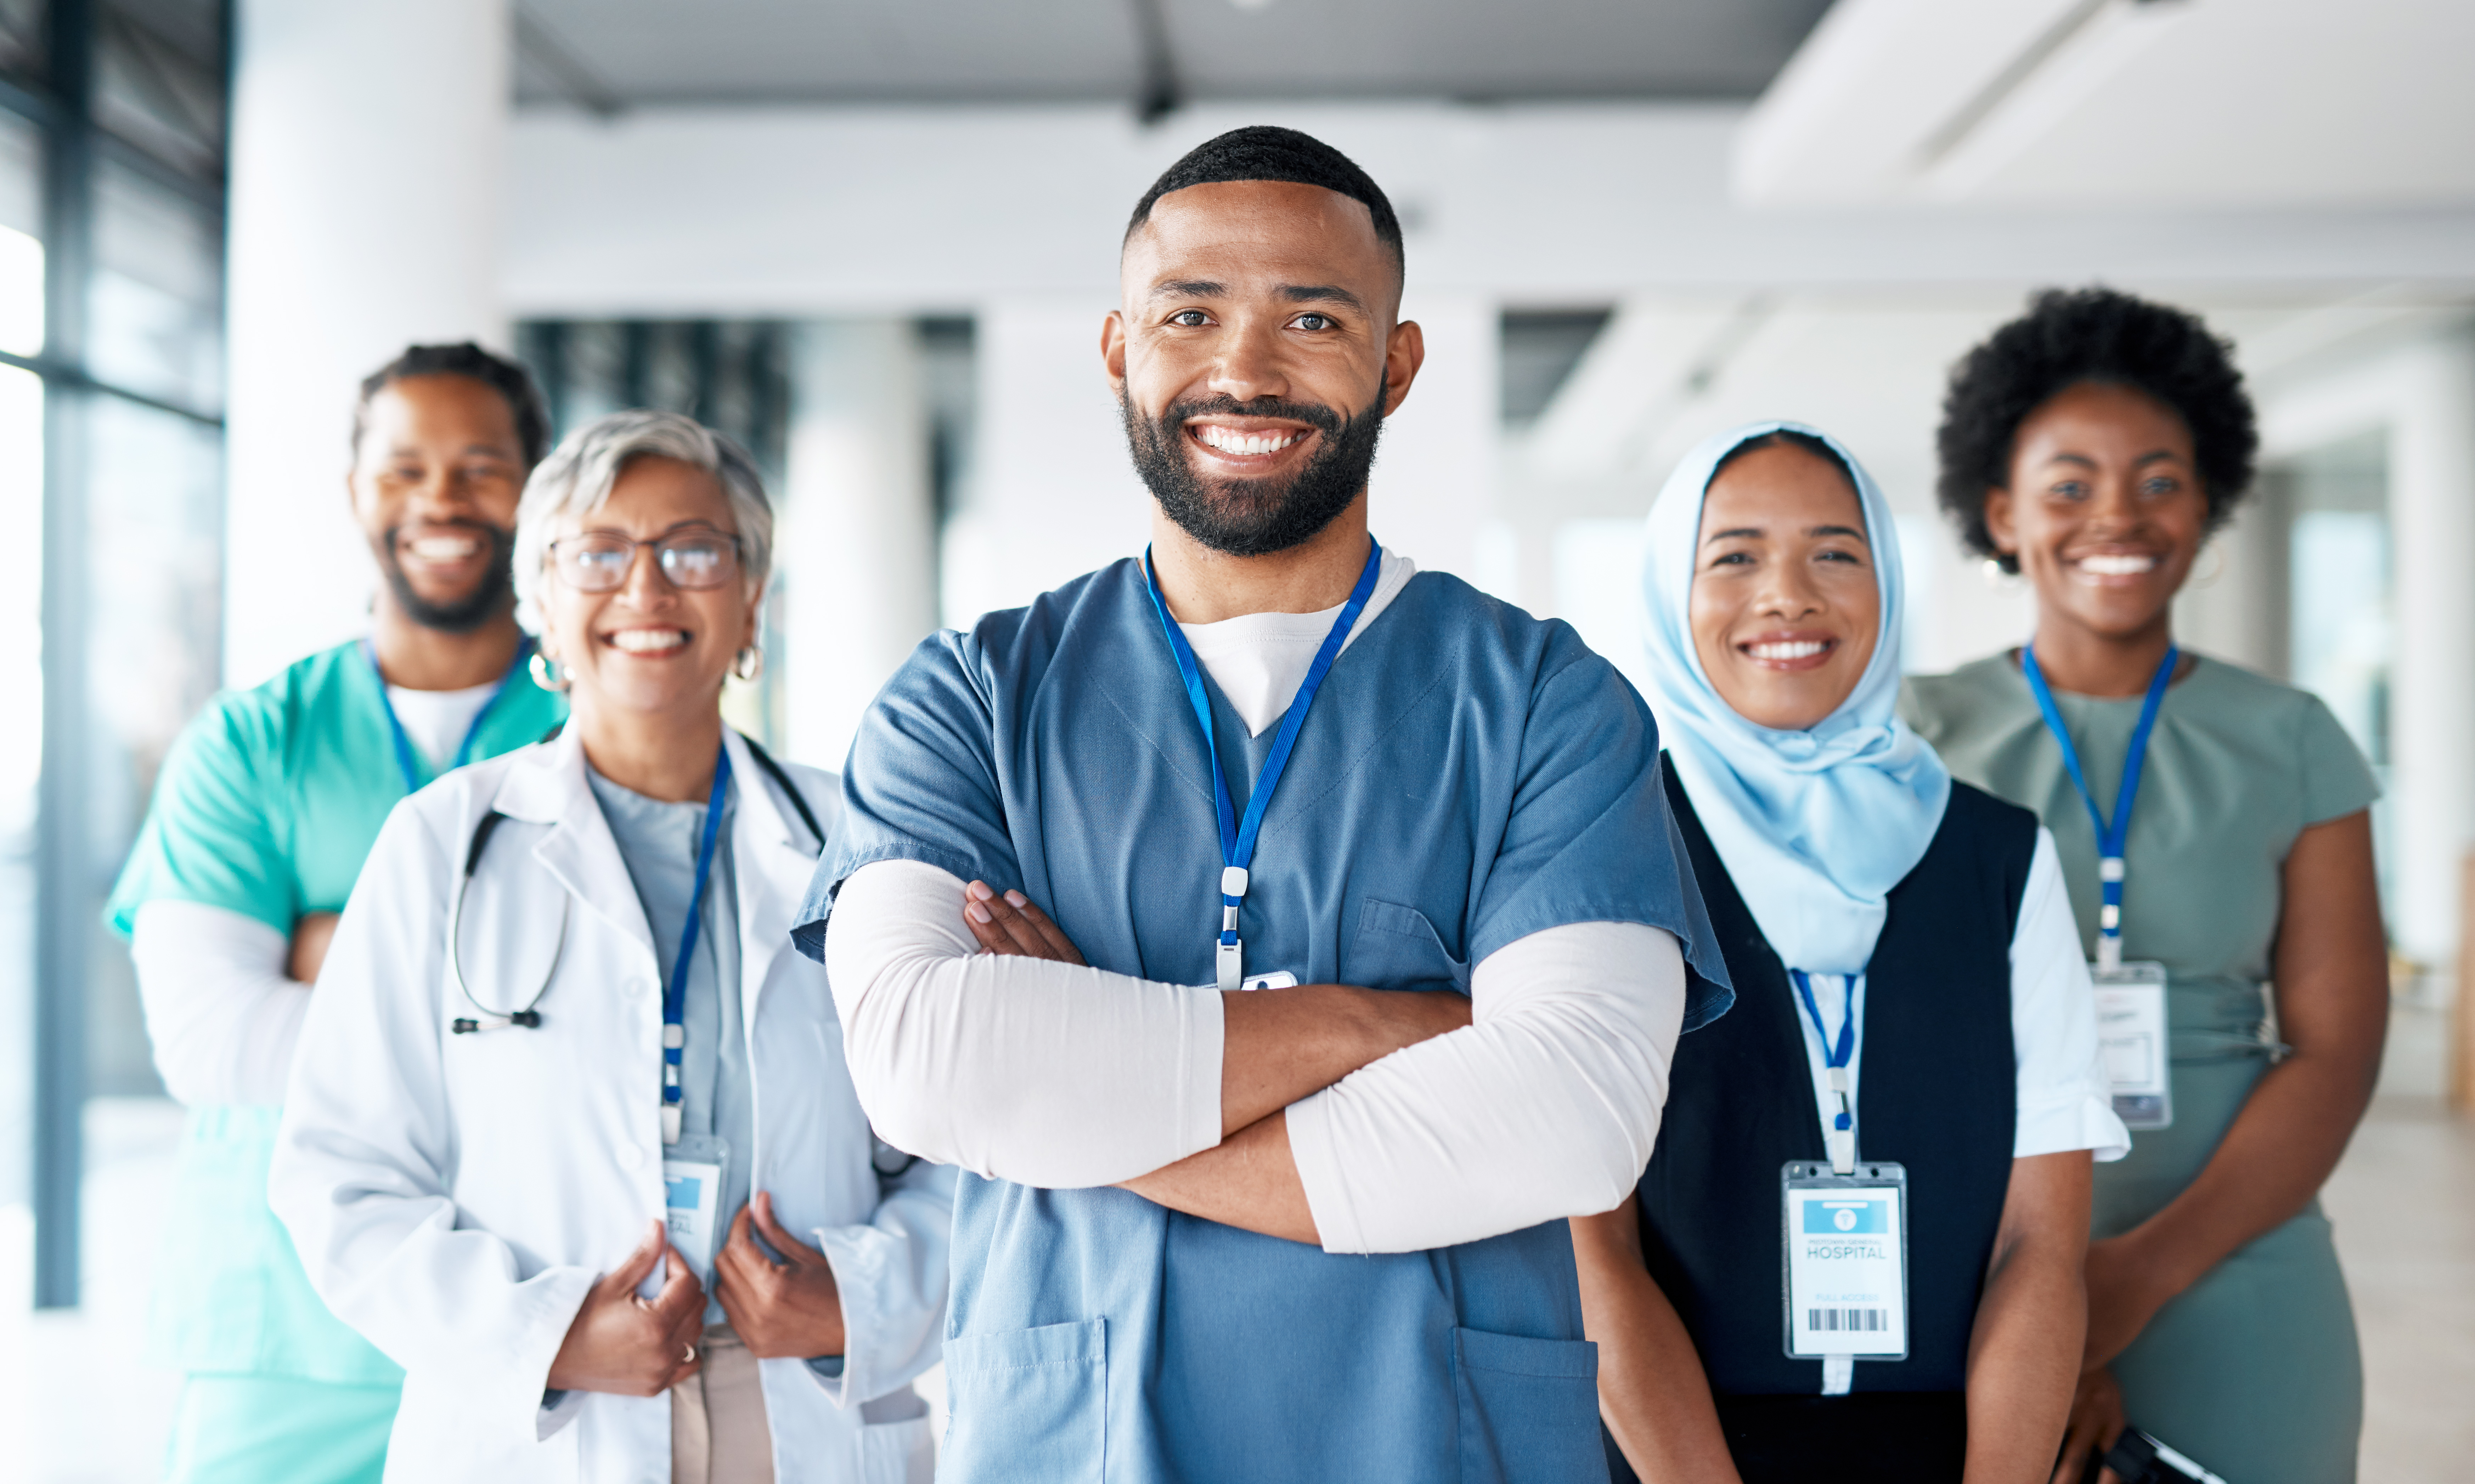 Healthcare, portrait and team of doctors in the hospital standing after a consultation or surgery. Success, confidence and group of professional medical workers in collaboration at a medicare clinic. - stock photo